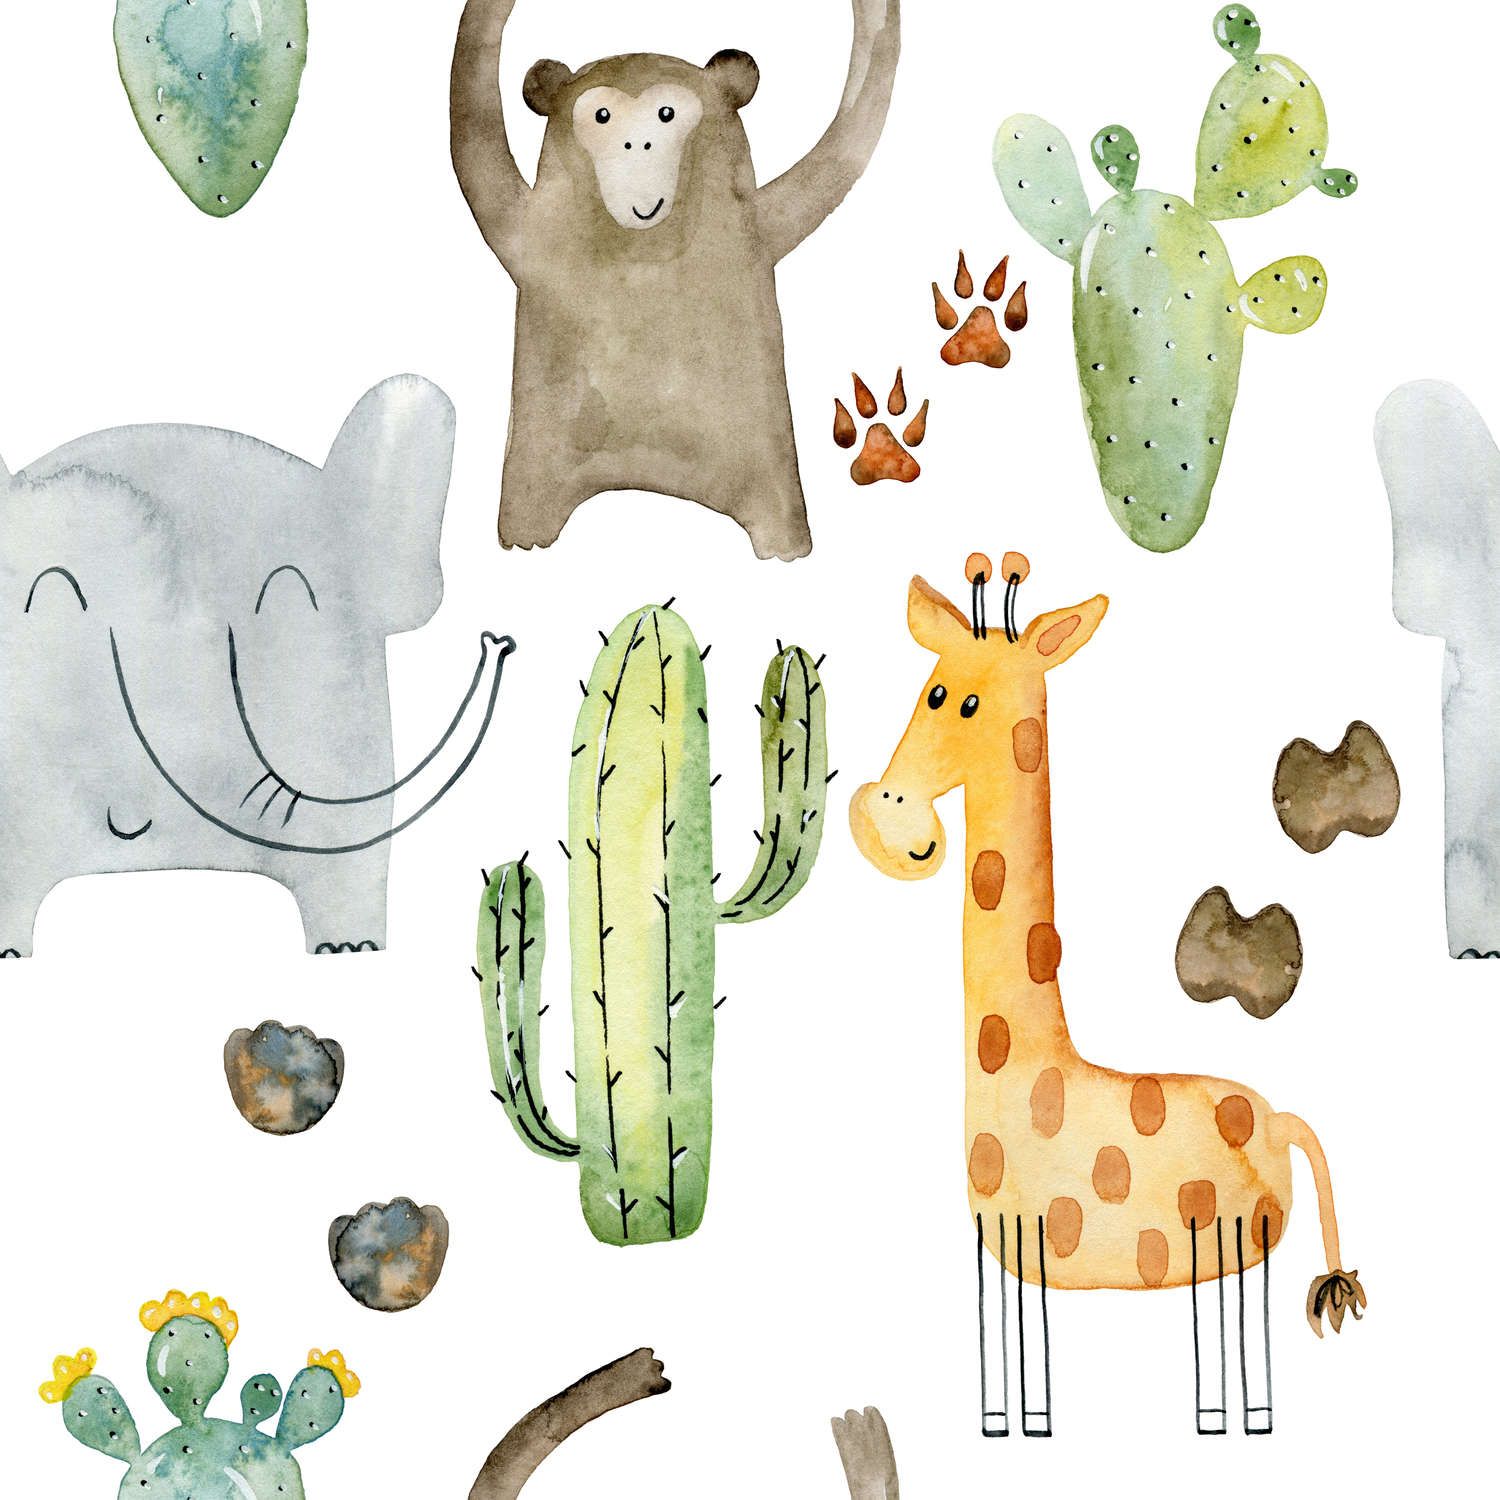             Animals and Cacti Wallpaper - Smooth & Slightly Glossy Non-woven
        